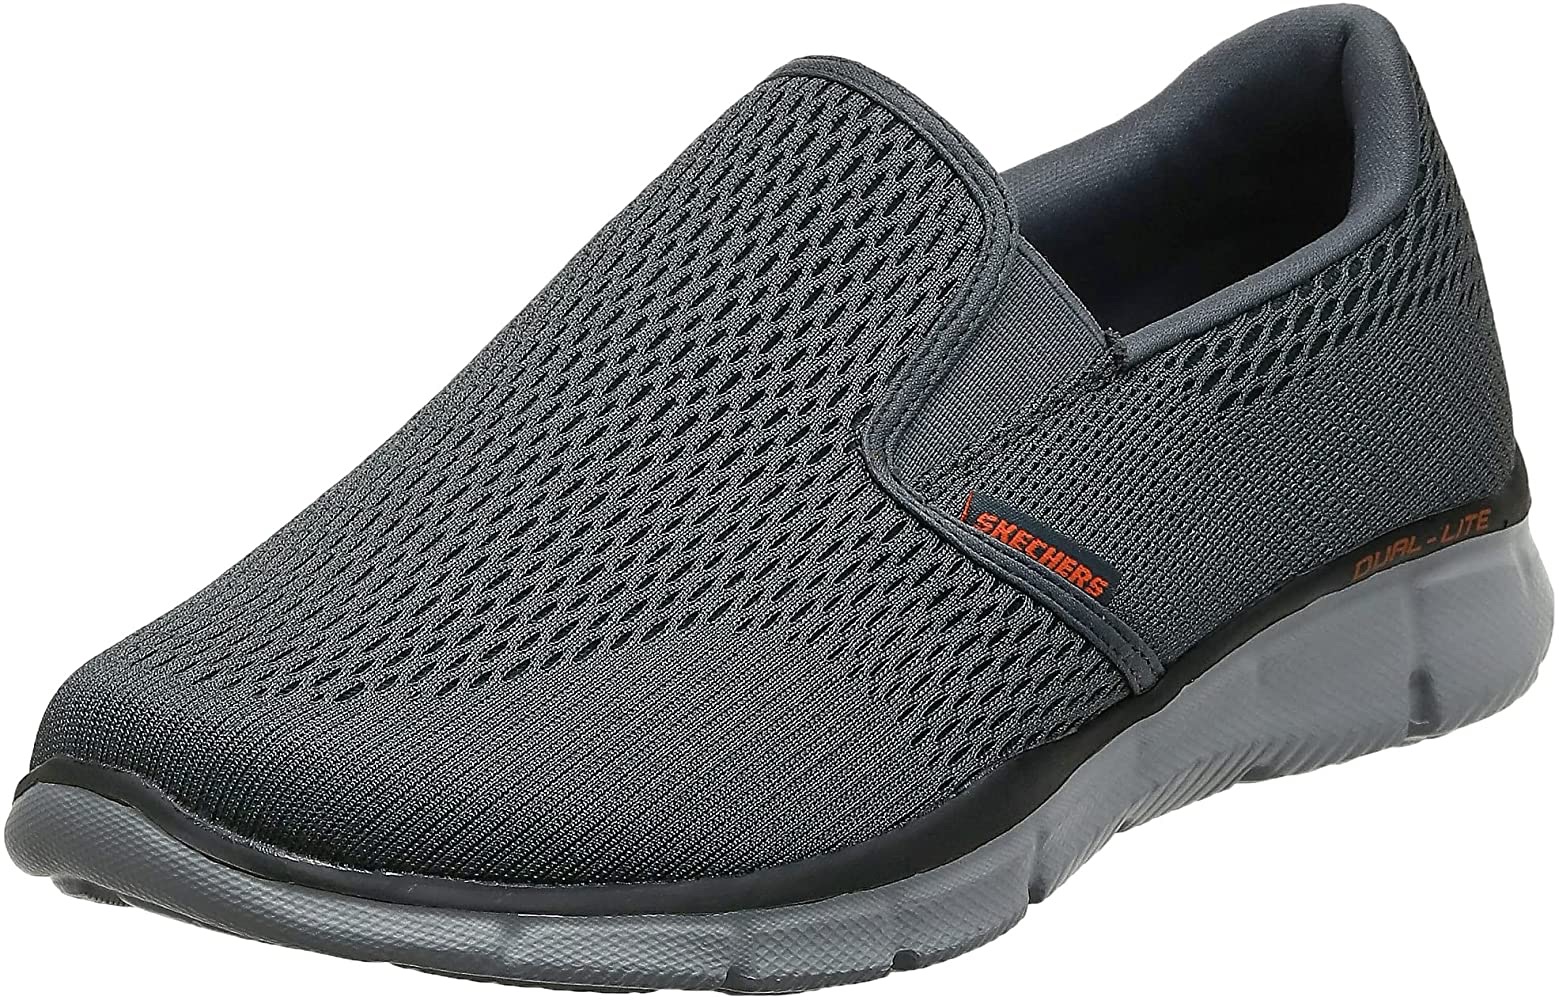 Skechers 男士 Equalizer Double Play 乐福鞋 Amazon.com | Skechers Men's Equalizer Double Play Slip-On Loafer,Charcoal/Orange,8 M US | Loafers & Slip-Ons